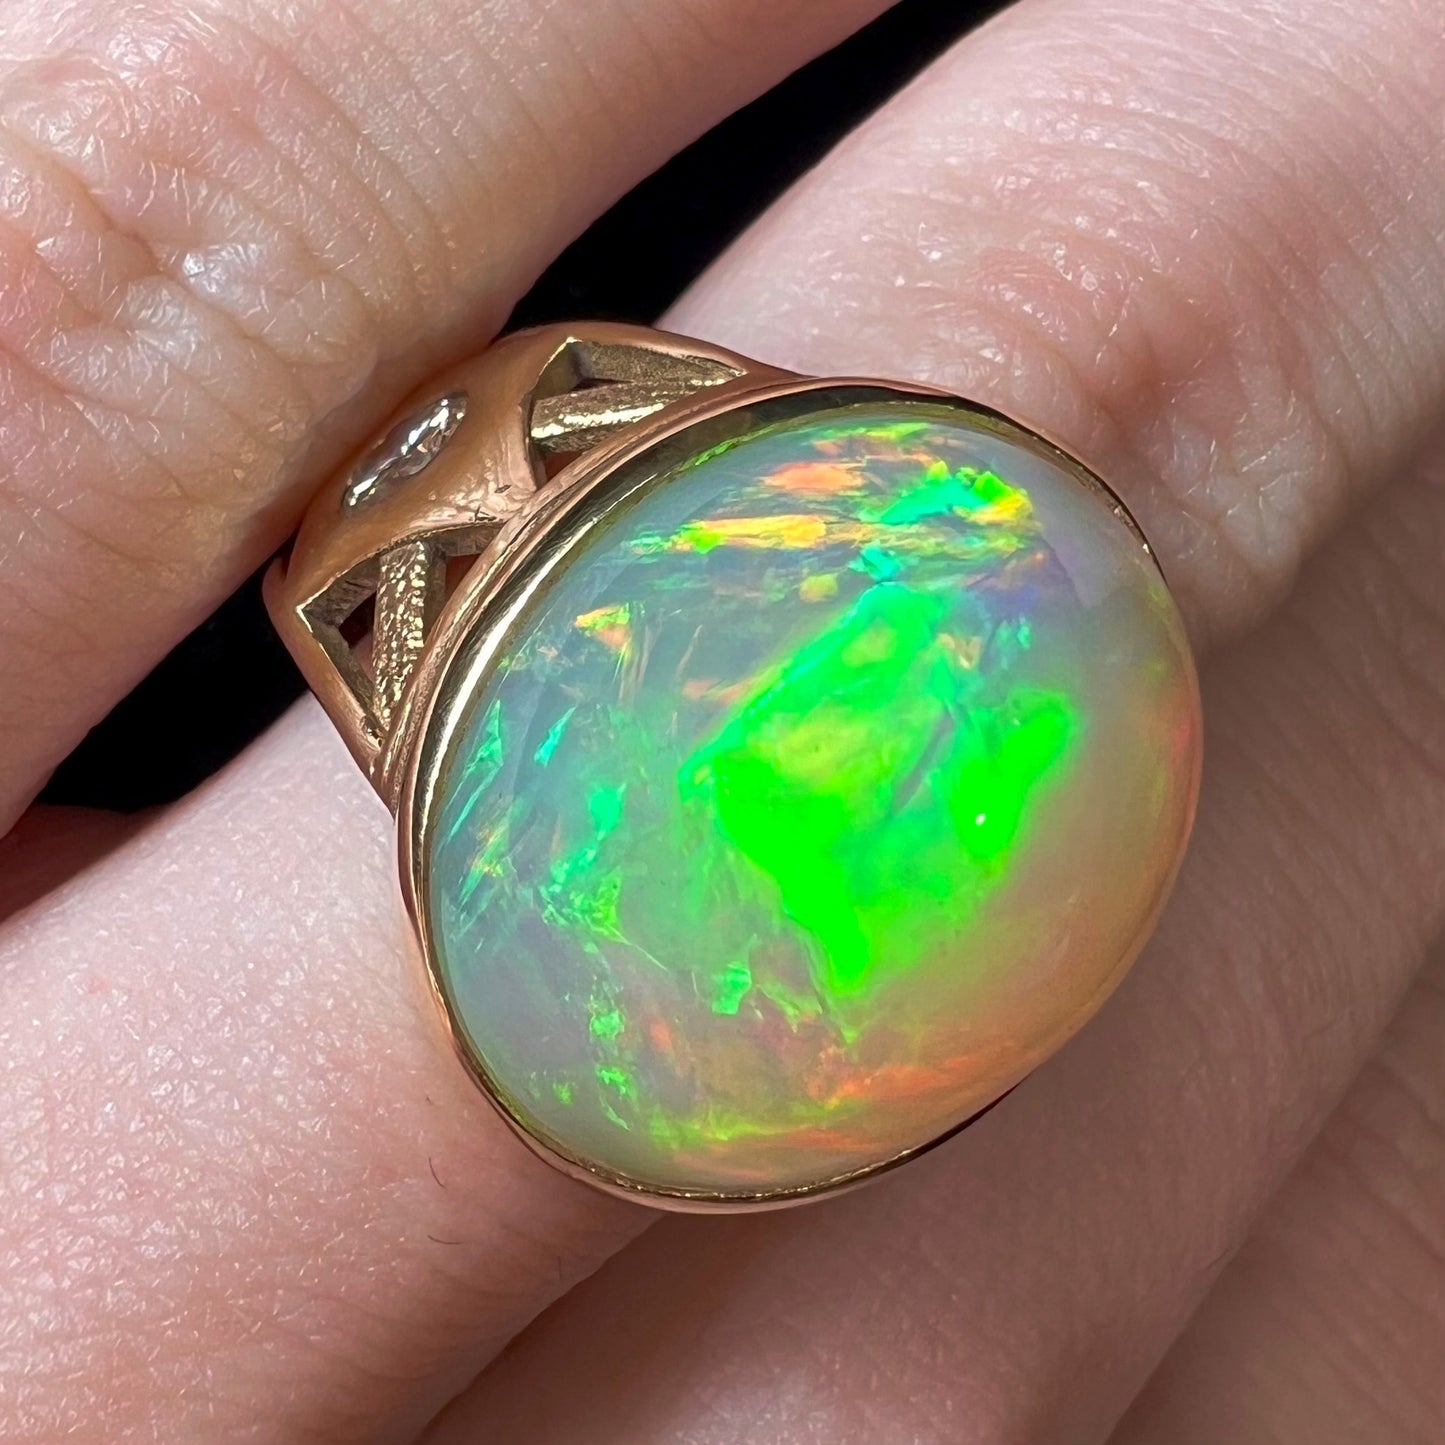 A custom yellow gold men's ring set with two diamonds and a large oval cabochon cut opal from Ethiopia, Africa.